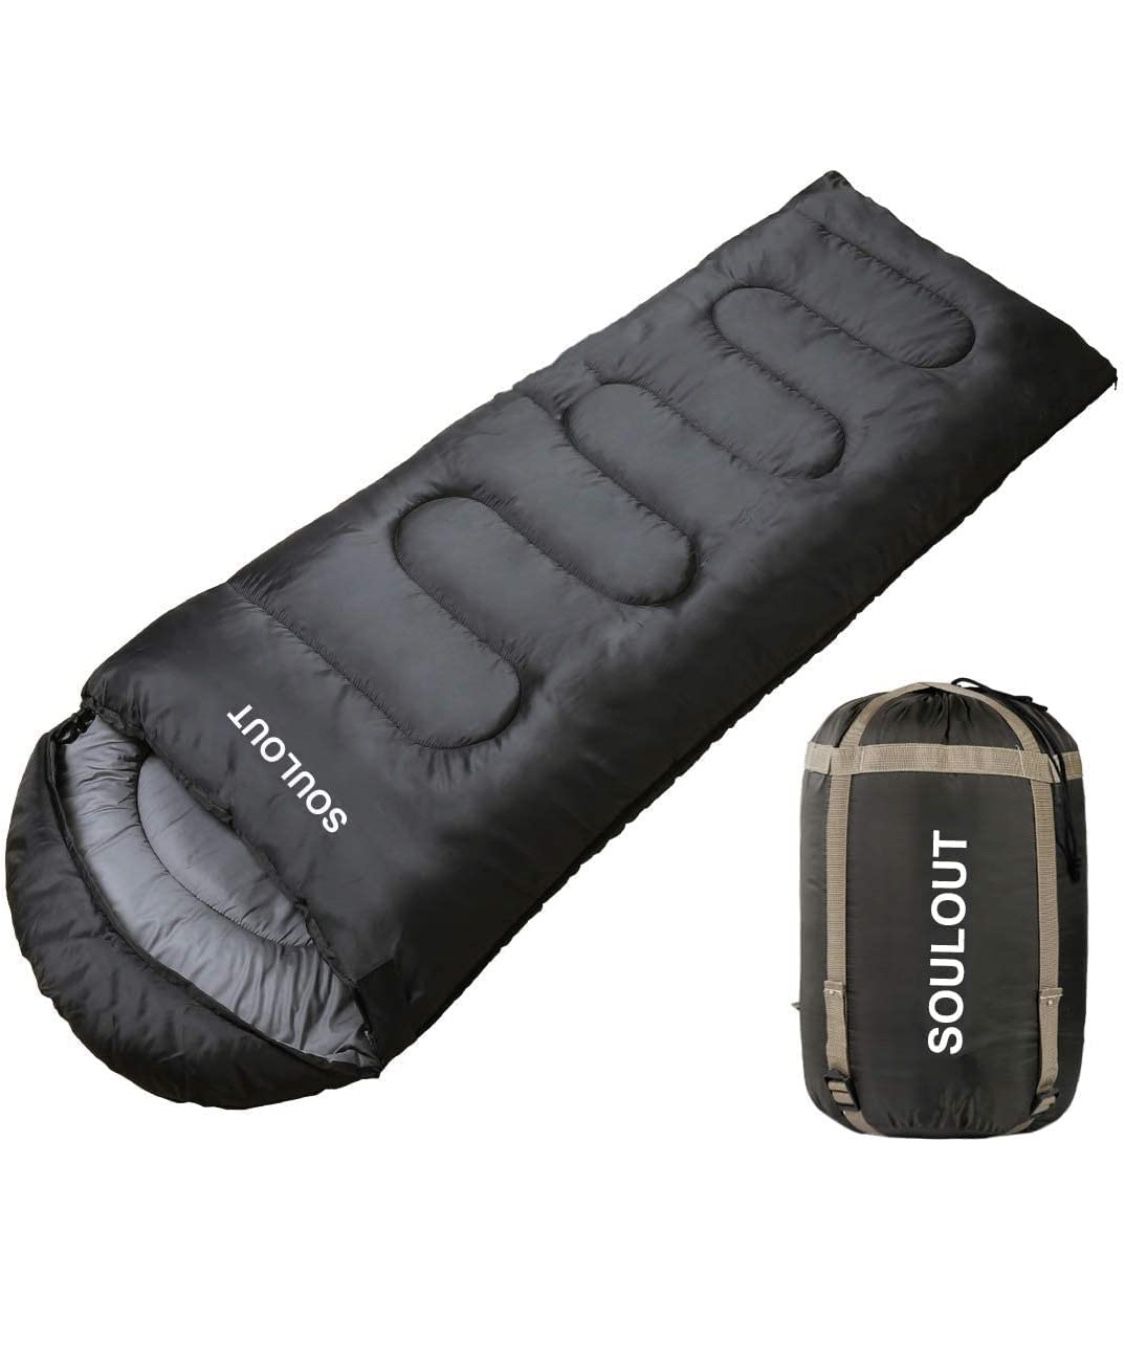 Sleeping Bag,3-4 Seasons Warm Cold Weather Lightweight, Portable, Waterproof Sleeping Bag with Compression Sack for Adults & Kids - Indoor & Outdoor: 